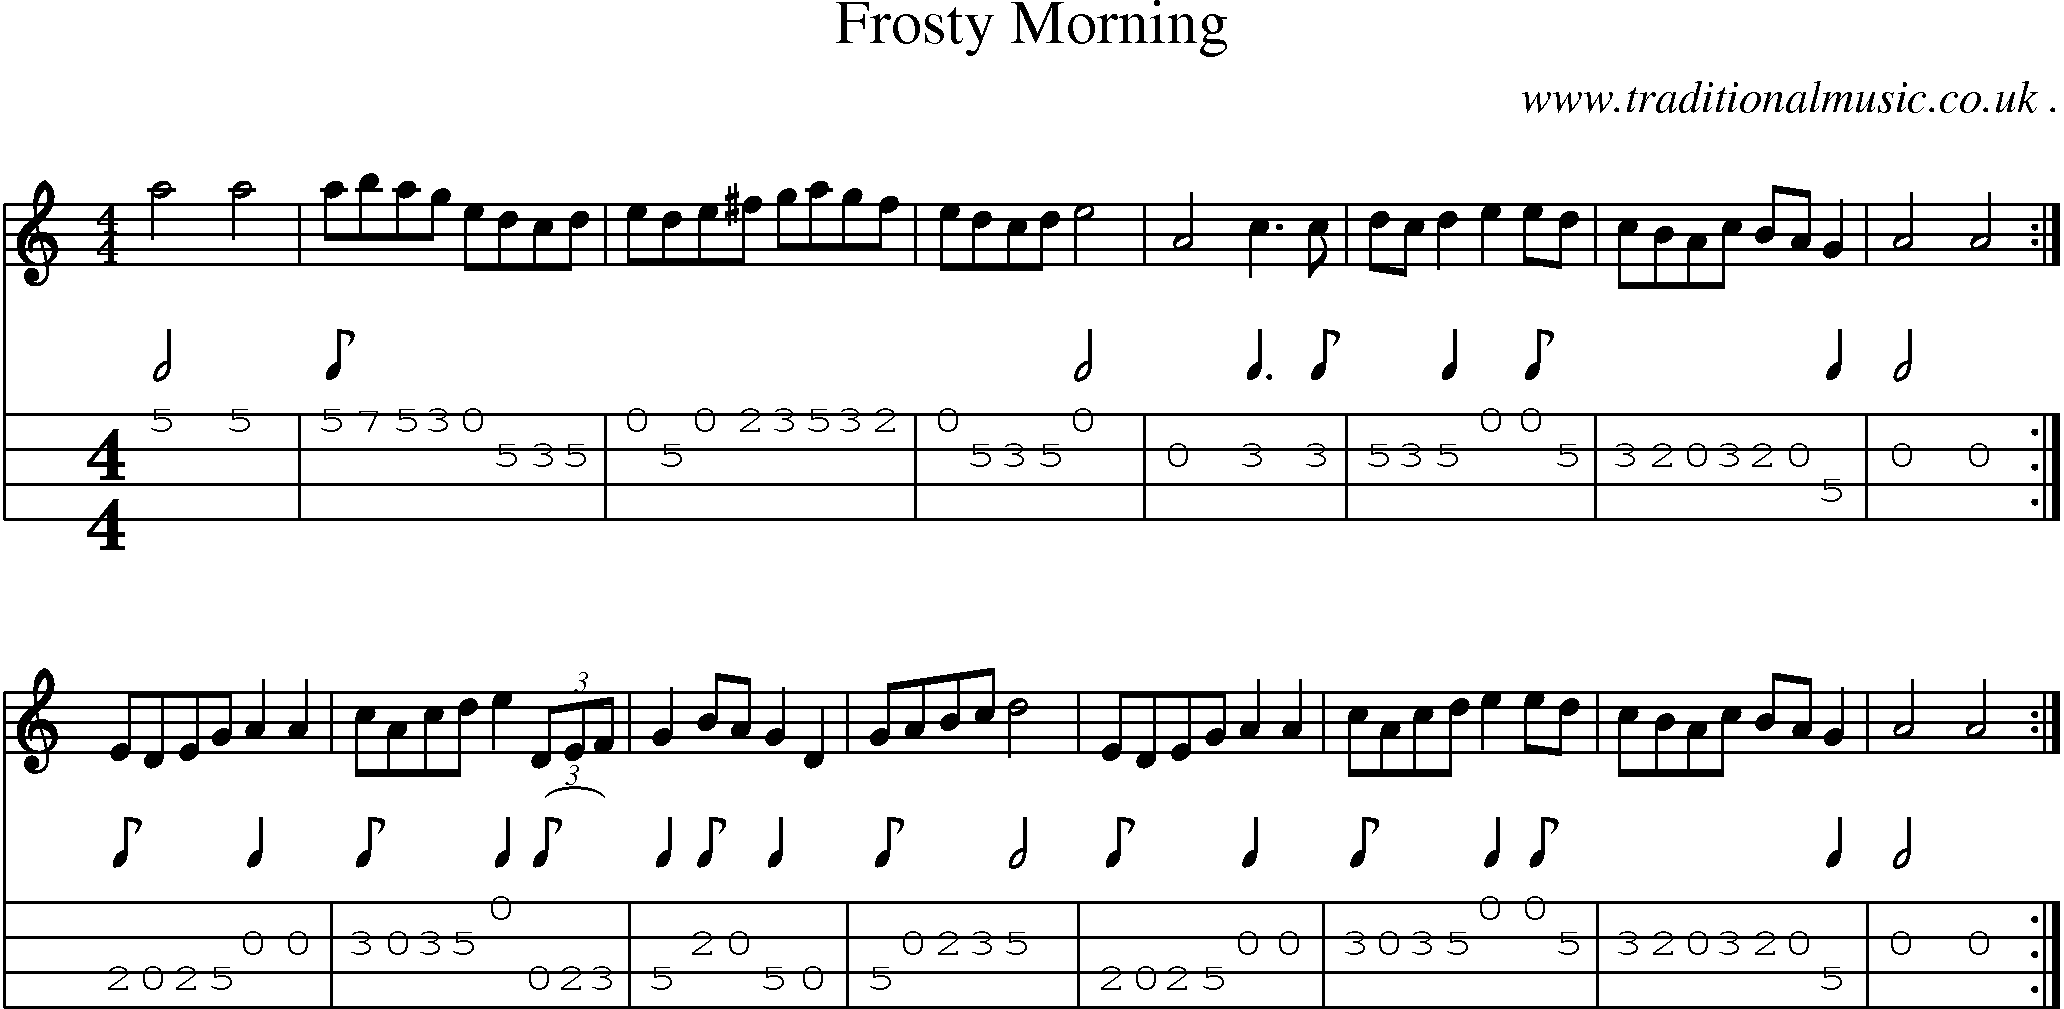 Sheet-music  score, Chords and Mandolin Tabs for Frosty Morning